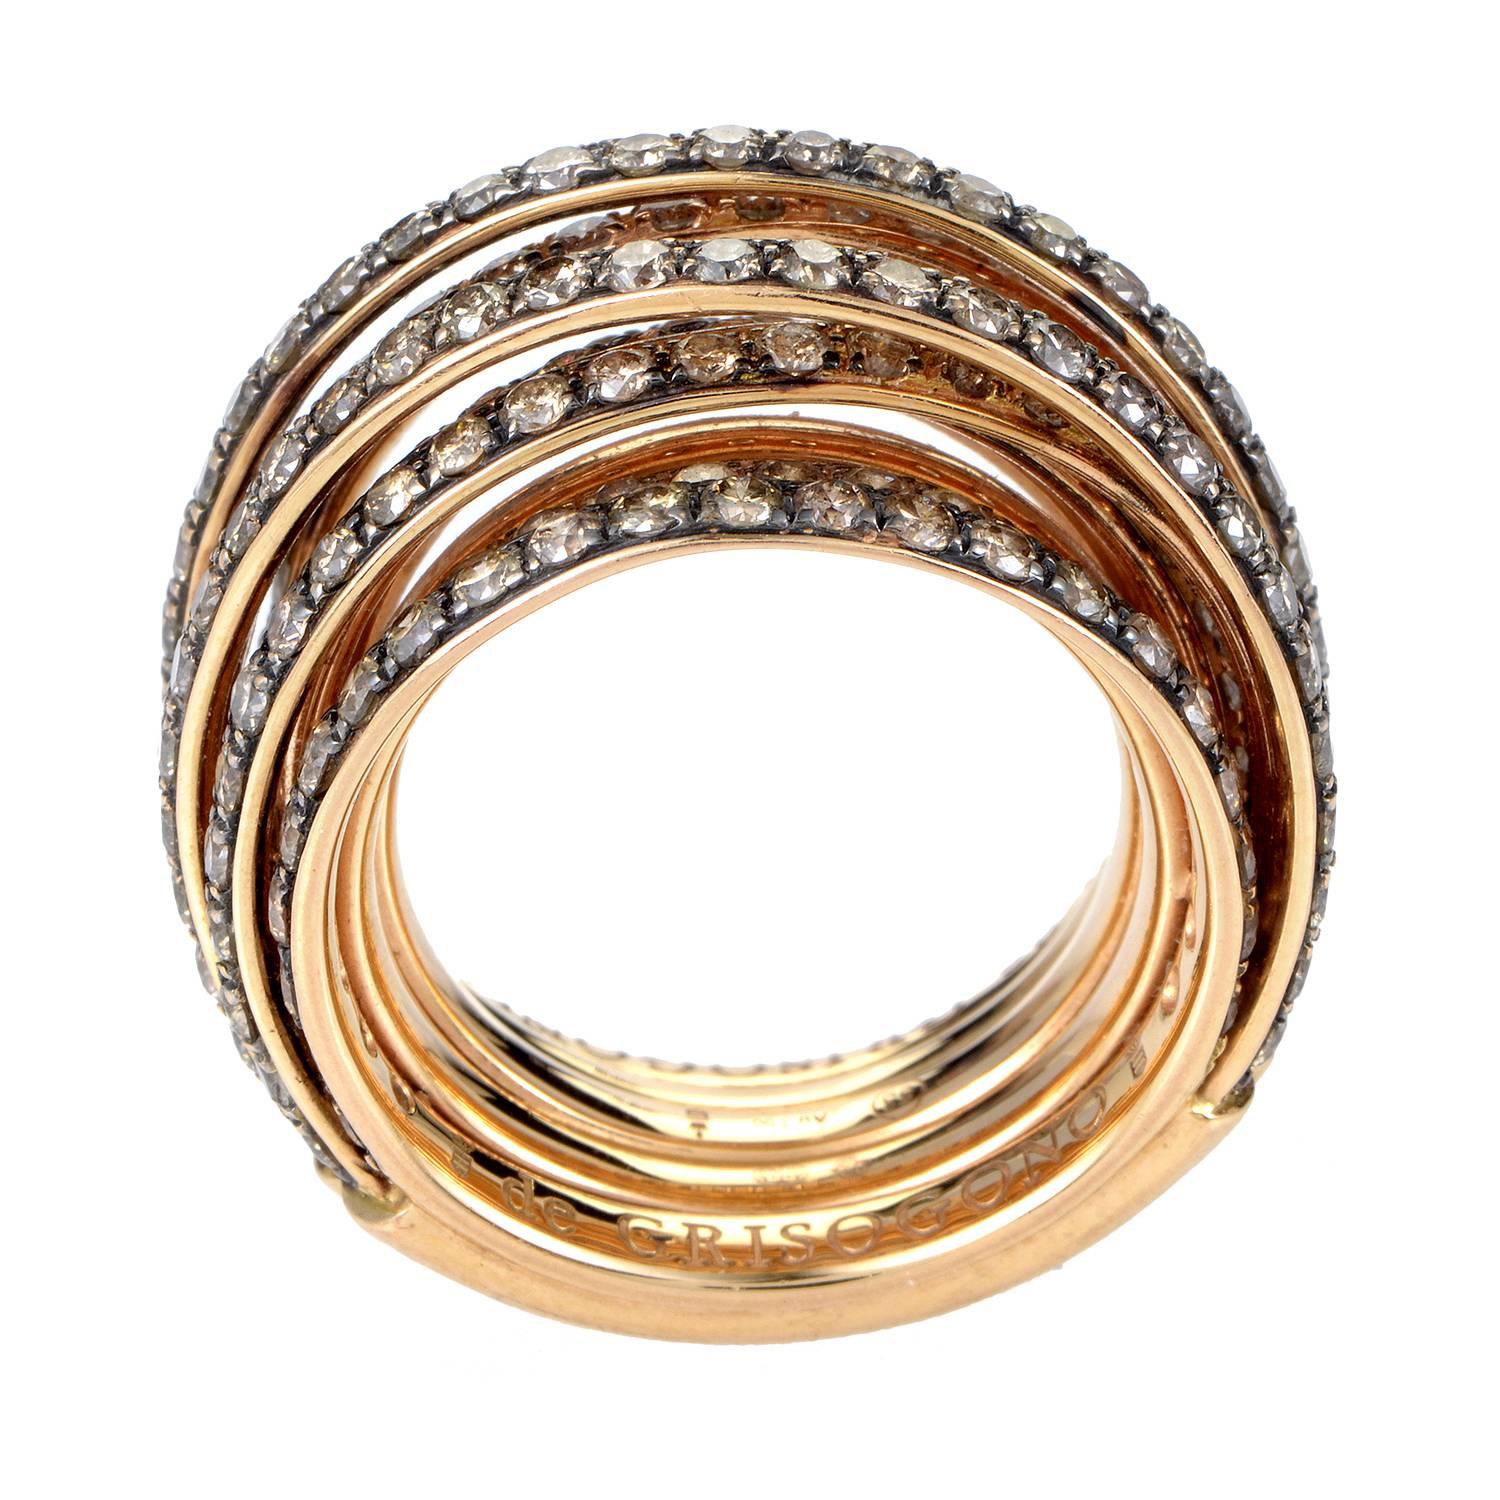 Countless bands of gorgeously radiant 18K rose gold merge to constitute the exceptional form of this outstanding ring from de Grisogono while the precious brilliance of diamonds totaling 5.44 carats adds a strong prestigious appeal.
Ring Size: 6.5